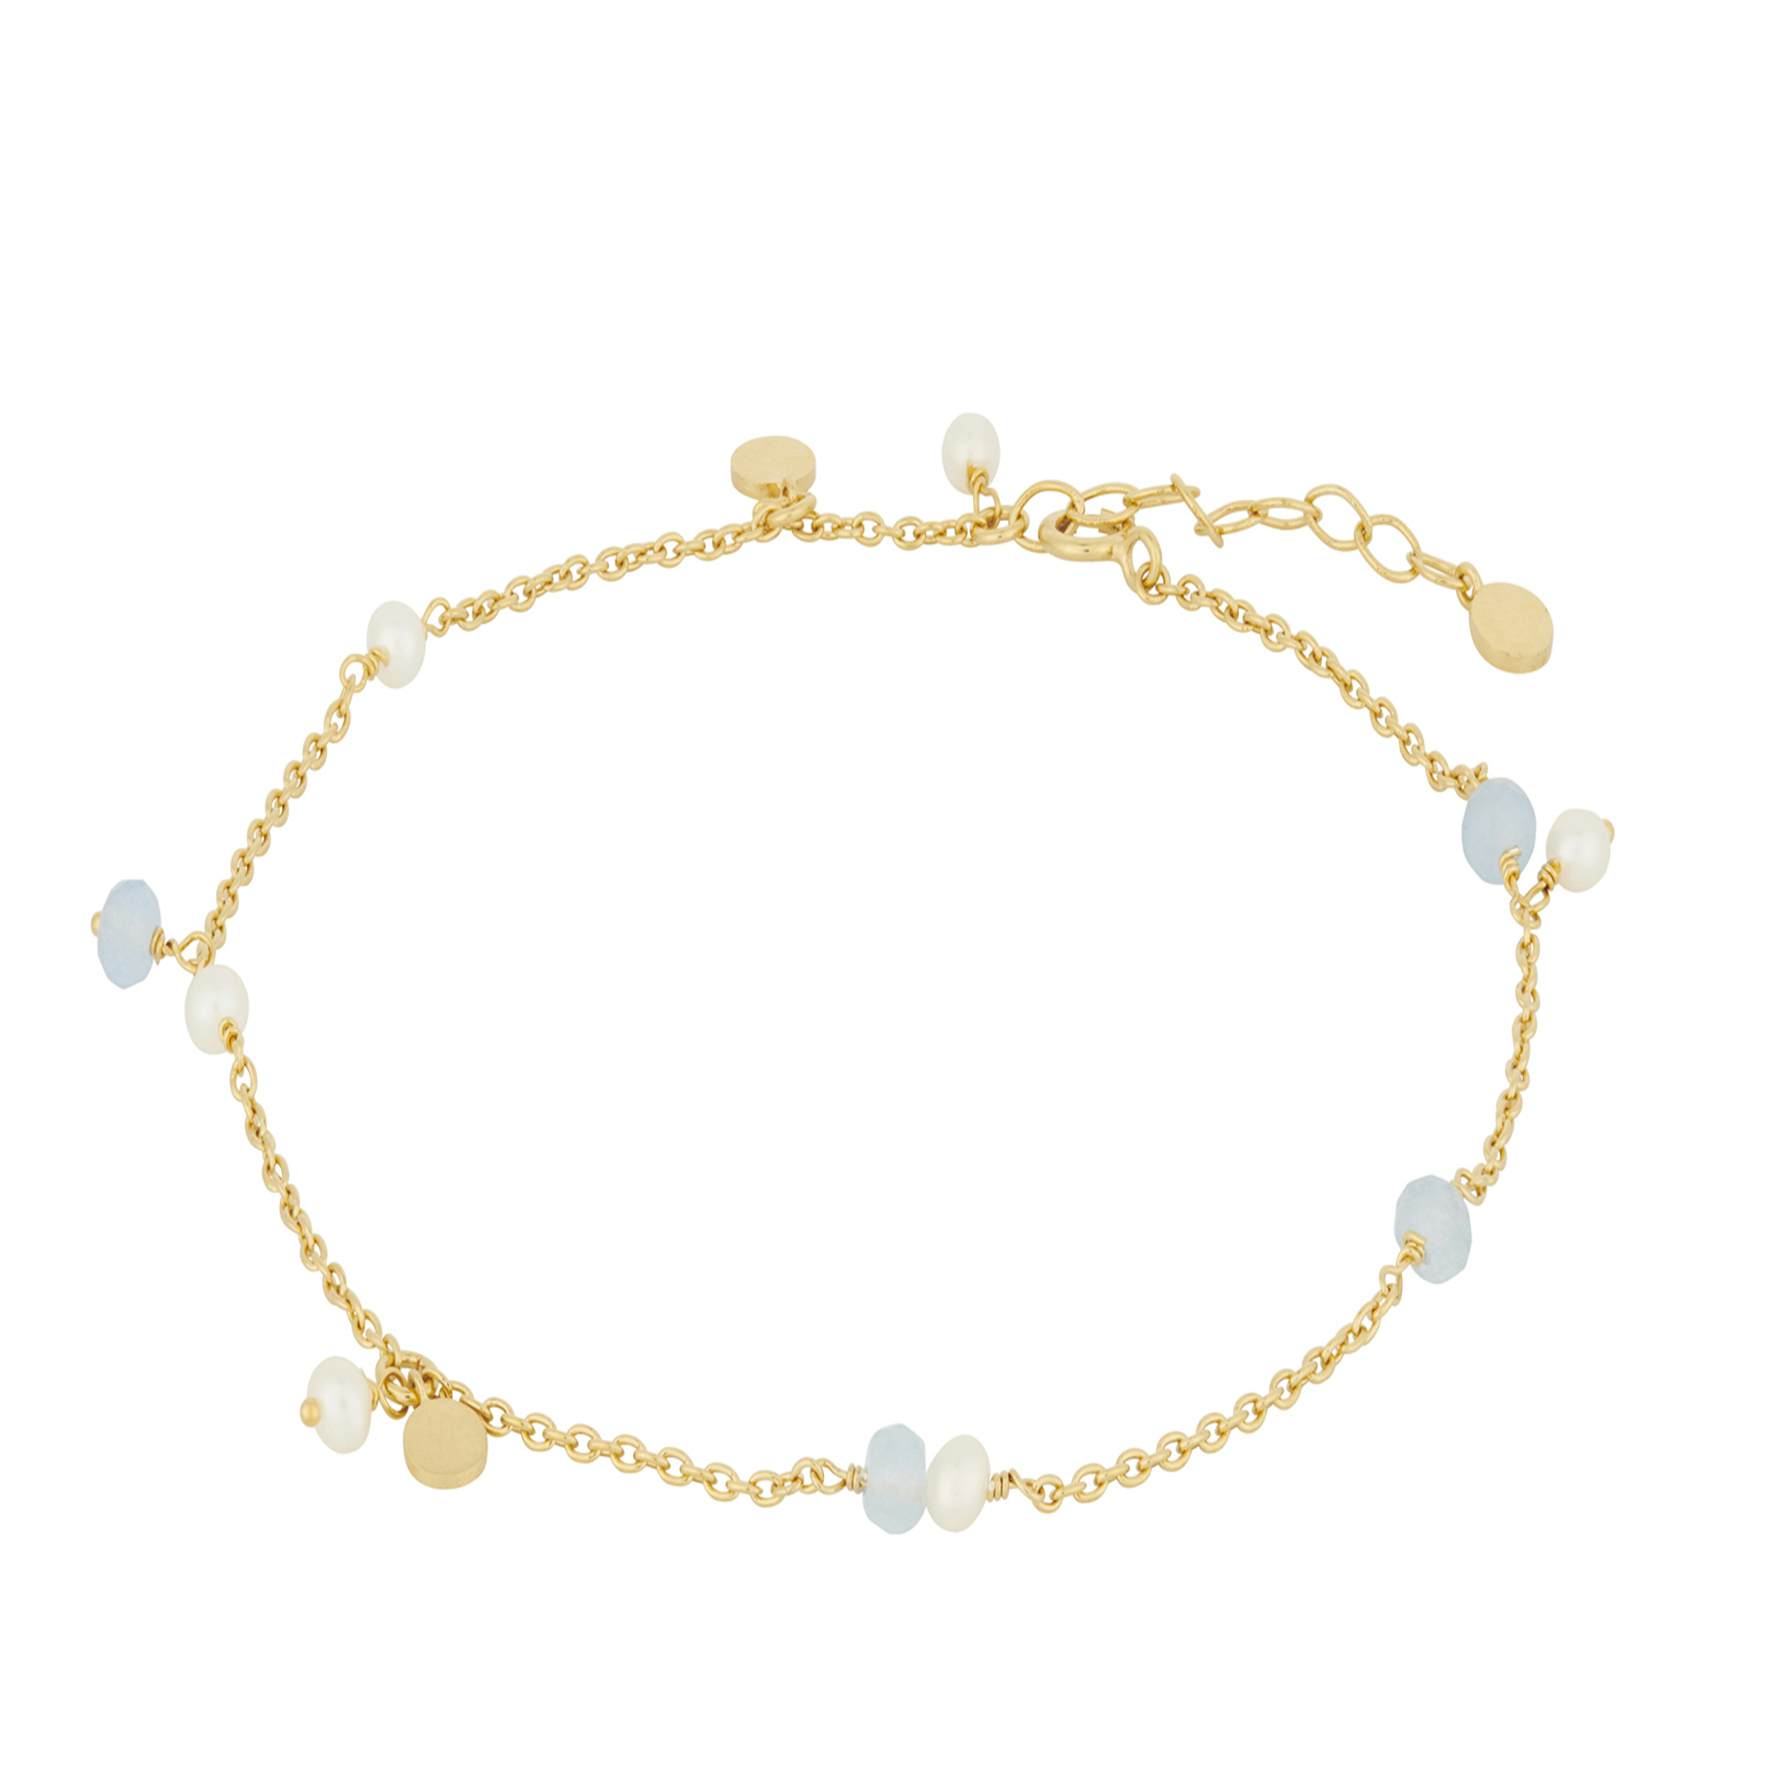 Afterglow Sea Anklet from Pernille Corydon in Goldplated-Silver Sterling 925